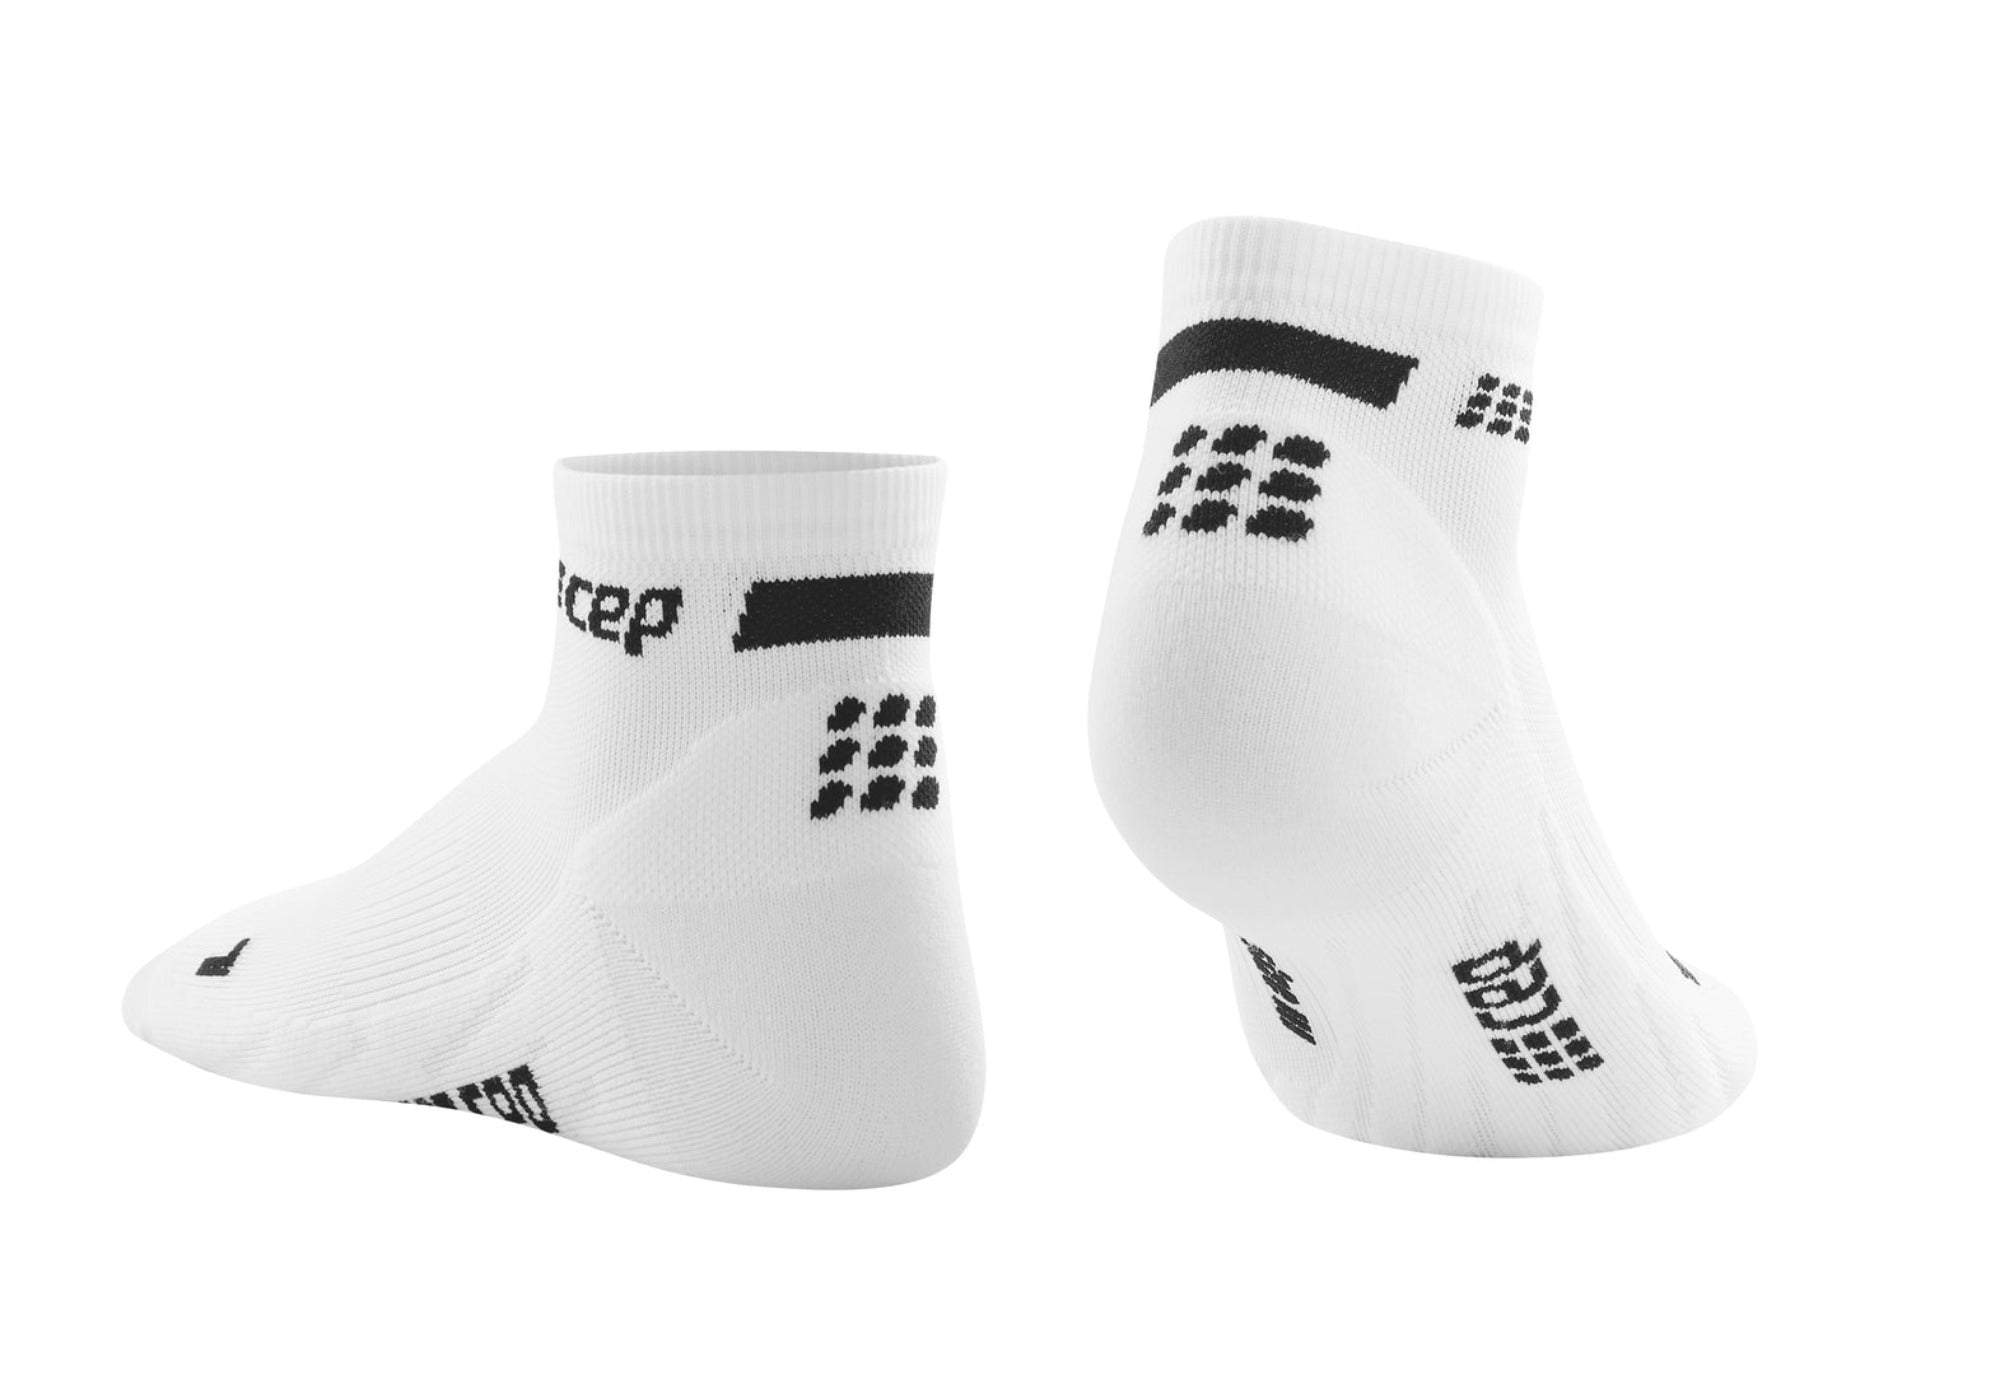 The Run Low Cut Socks 4.0 for Men  CEP Activating Compression Sportswear –  Compression Stockings